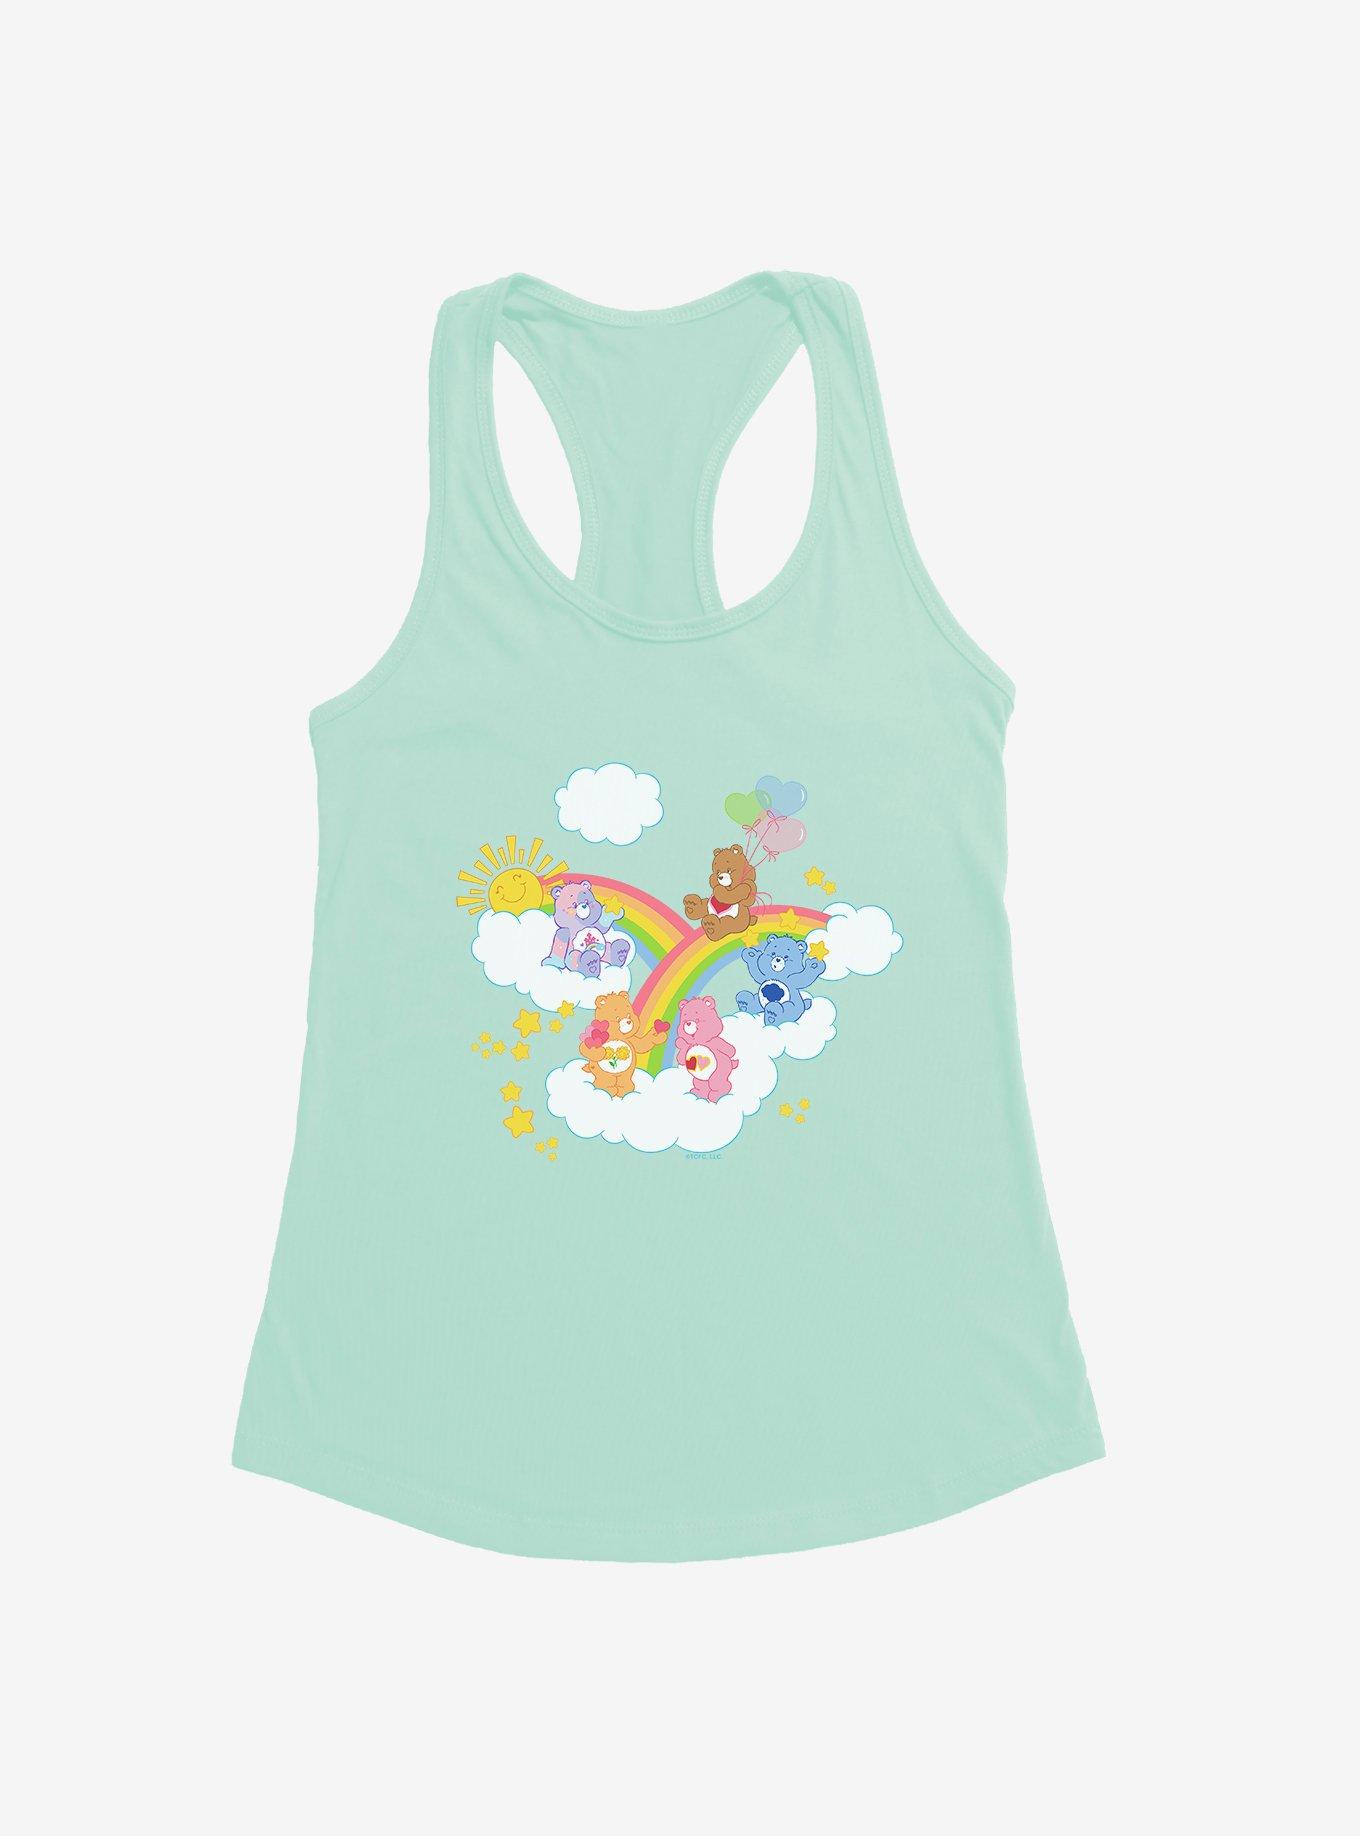 Care Bears Over The Rainbow Girls Tank Top, MINT, hi-res